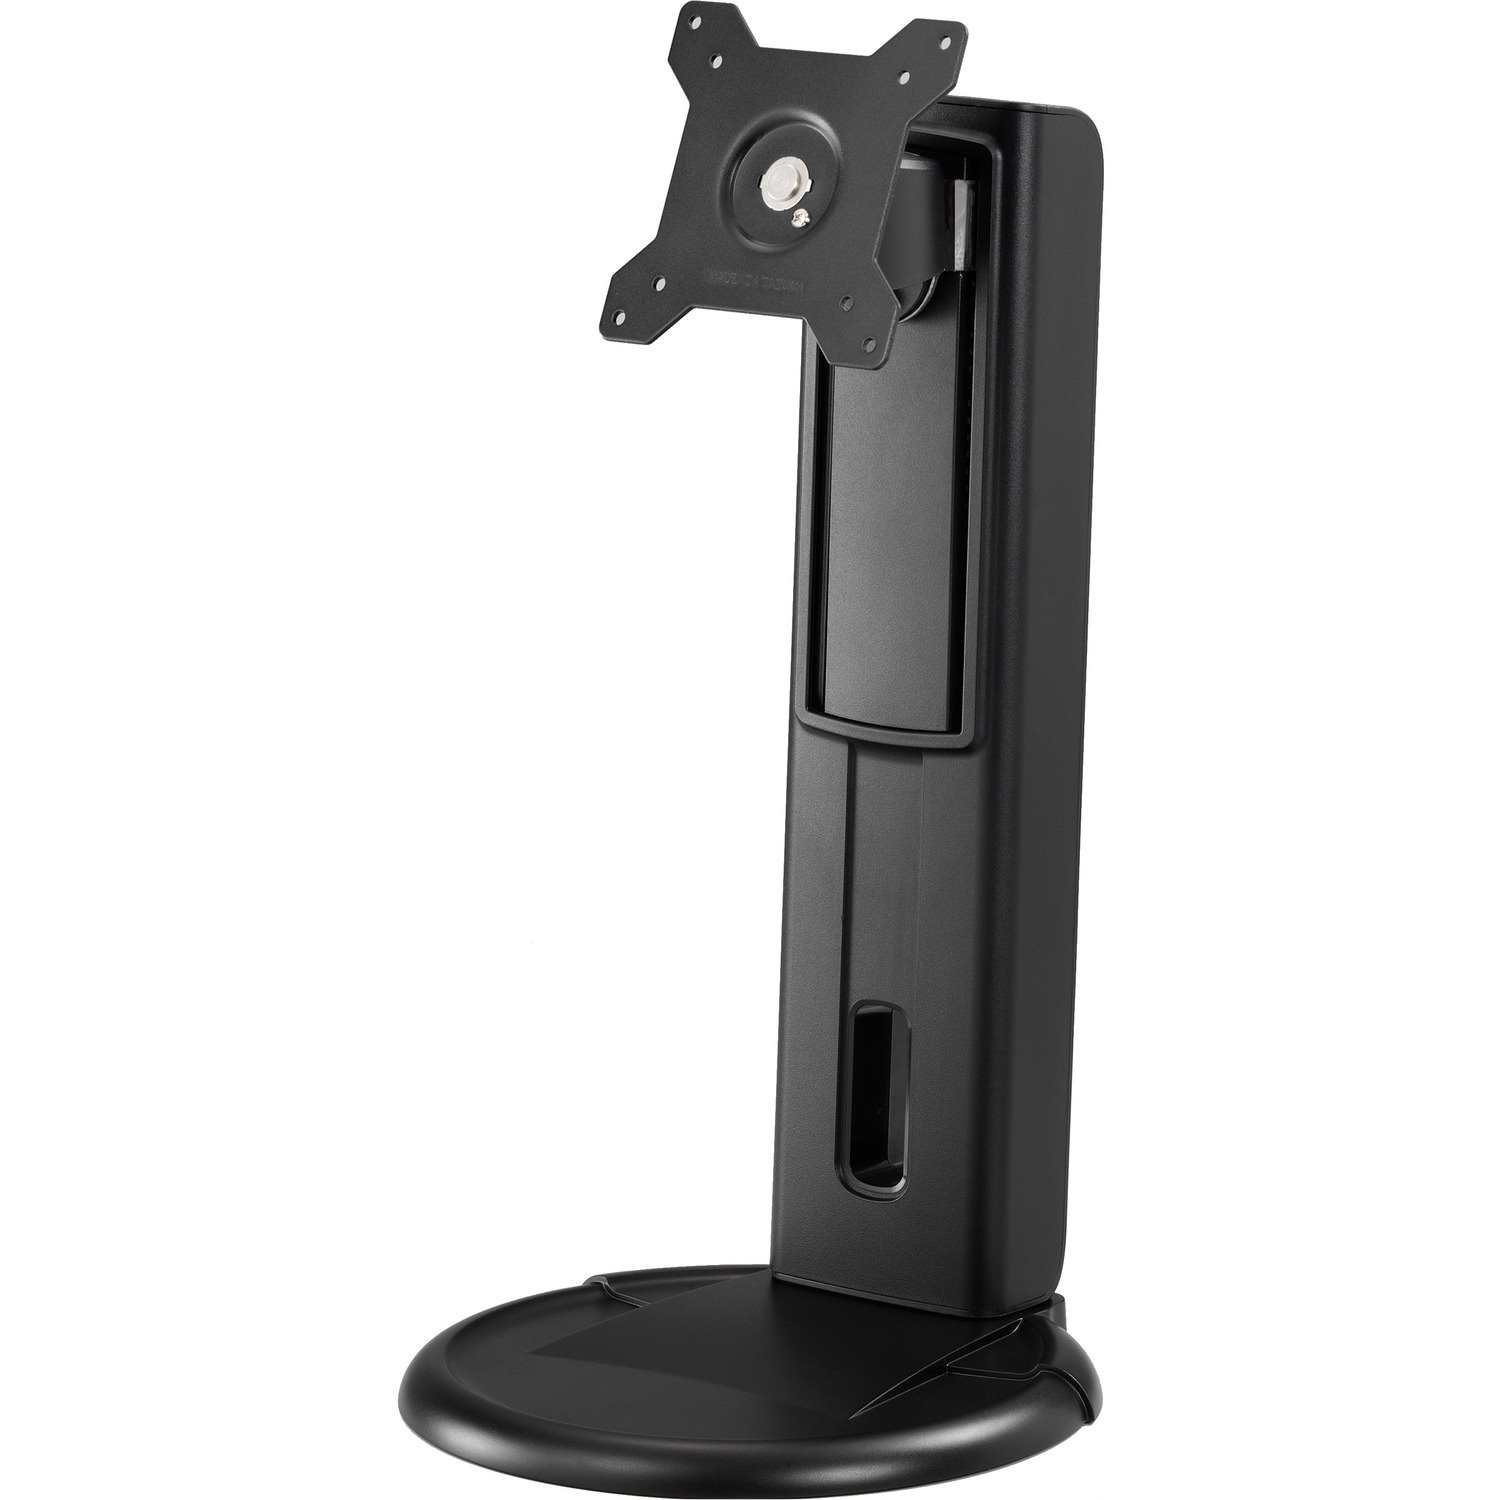 Amer Mounts Height Adjustable Single Monitor Stand for 15" - 24" LCD/LED Flat Panel Screens